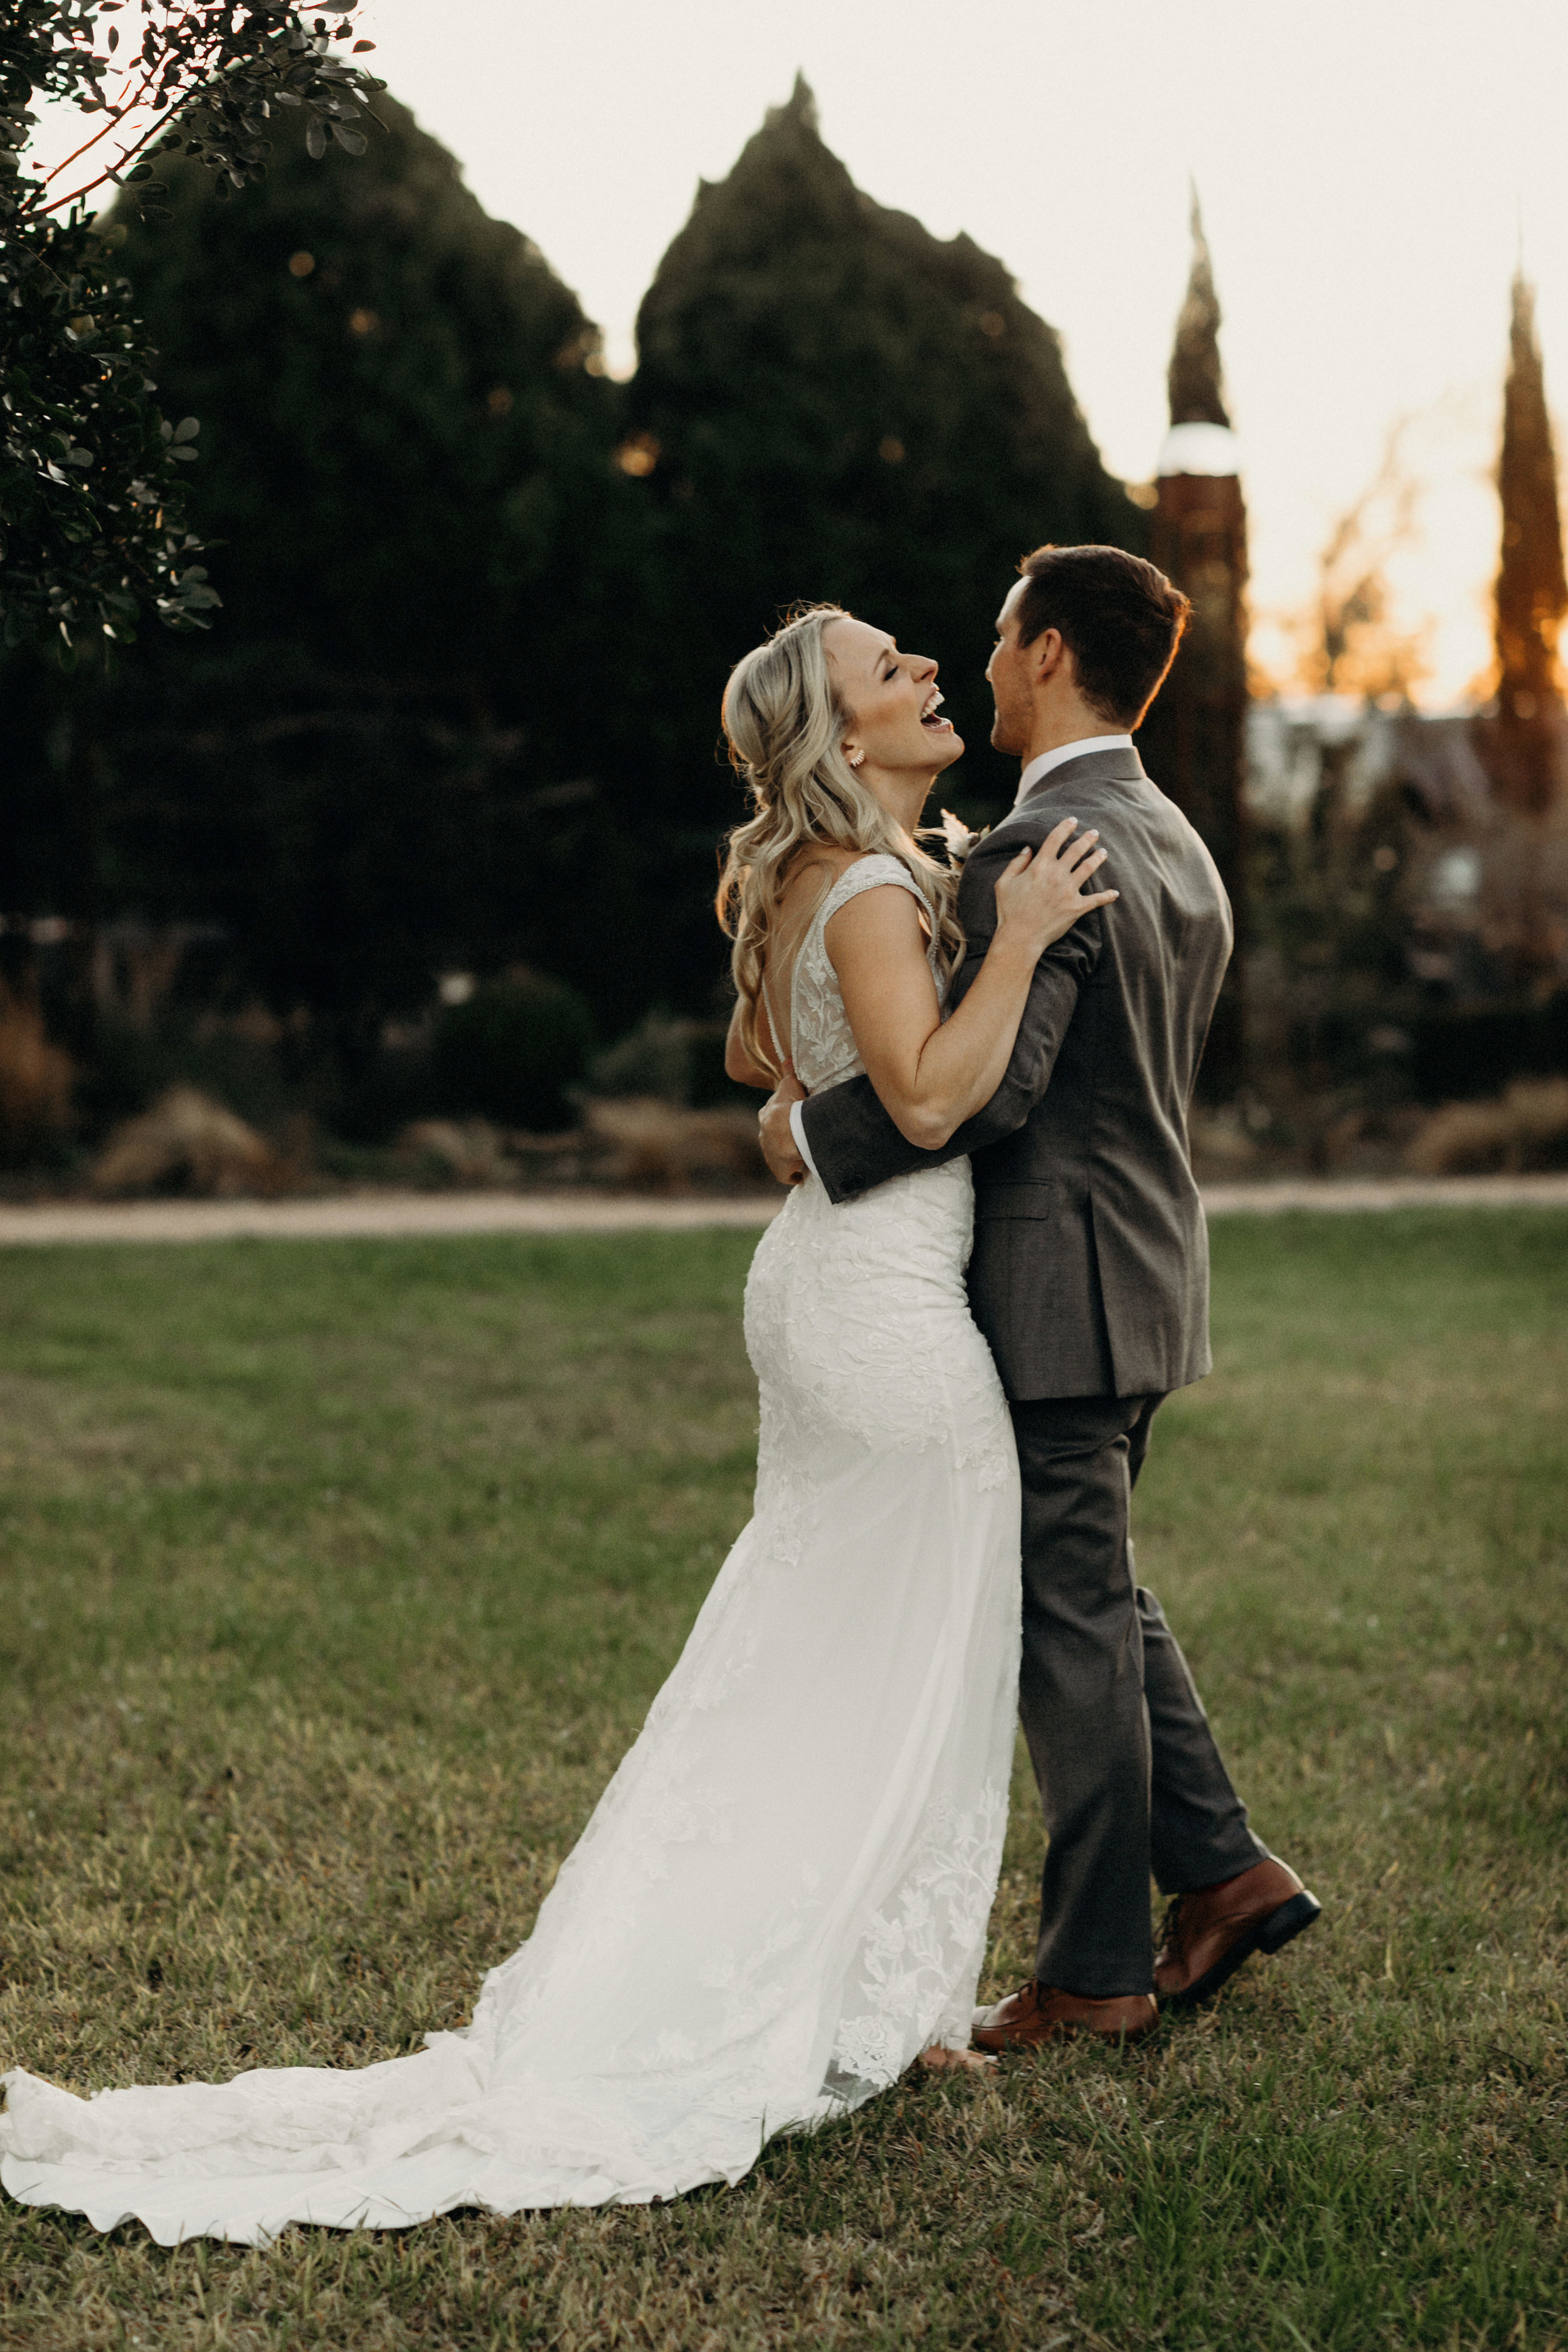 Wedding in Austin, Texas at Barr Mansion | Bride and groom portrait inspiration